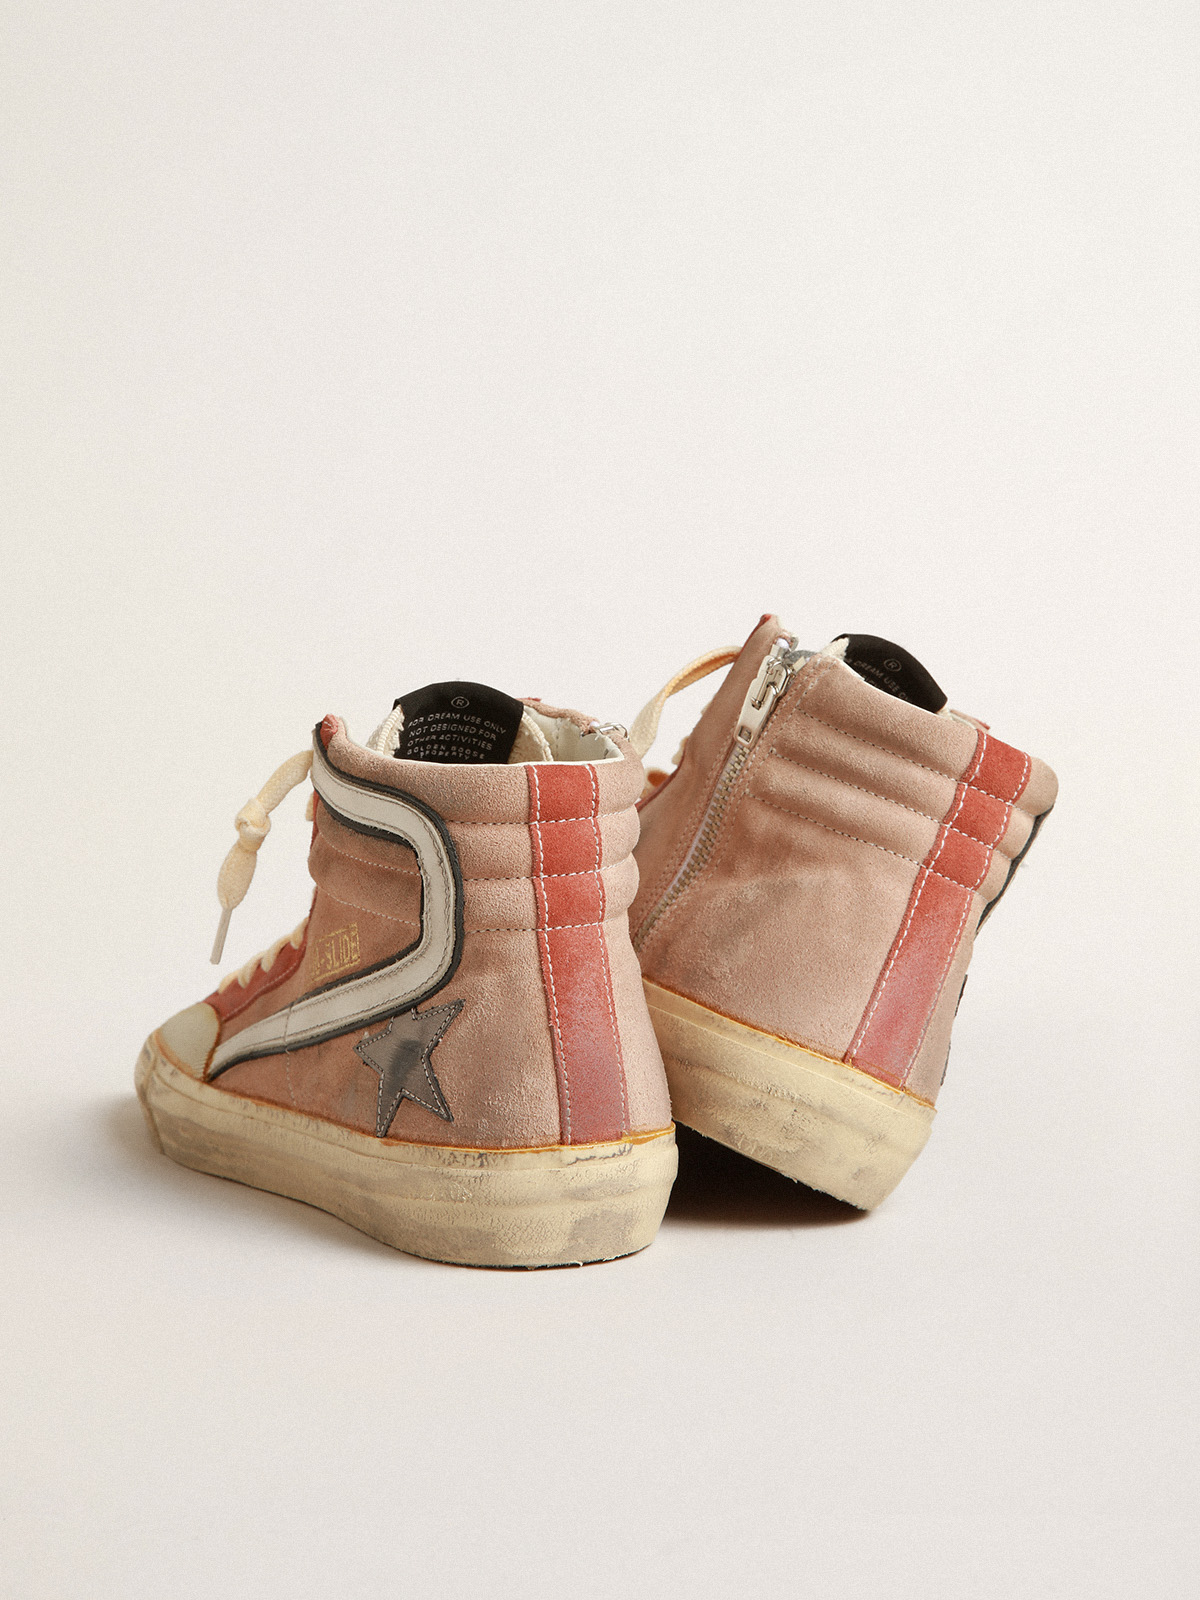 Slide in pink suede with anthracite laminated leather star | Golden Goose